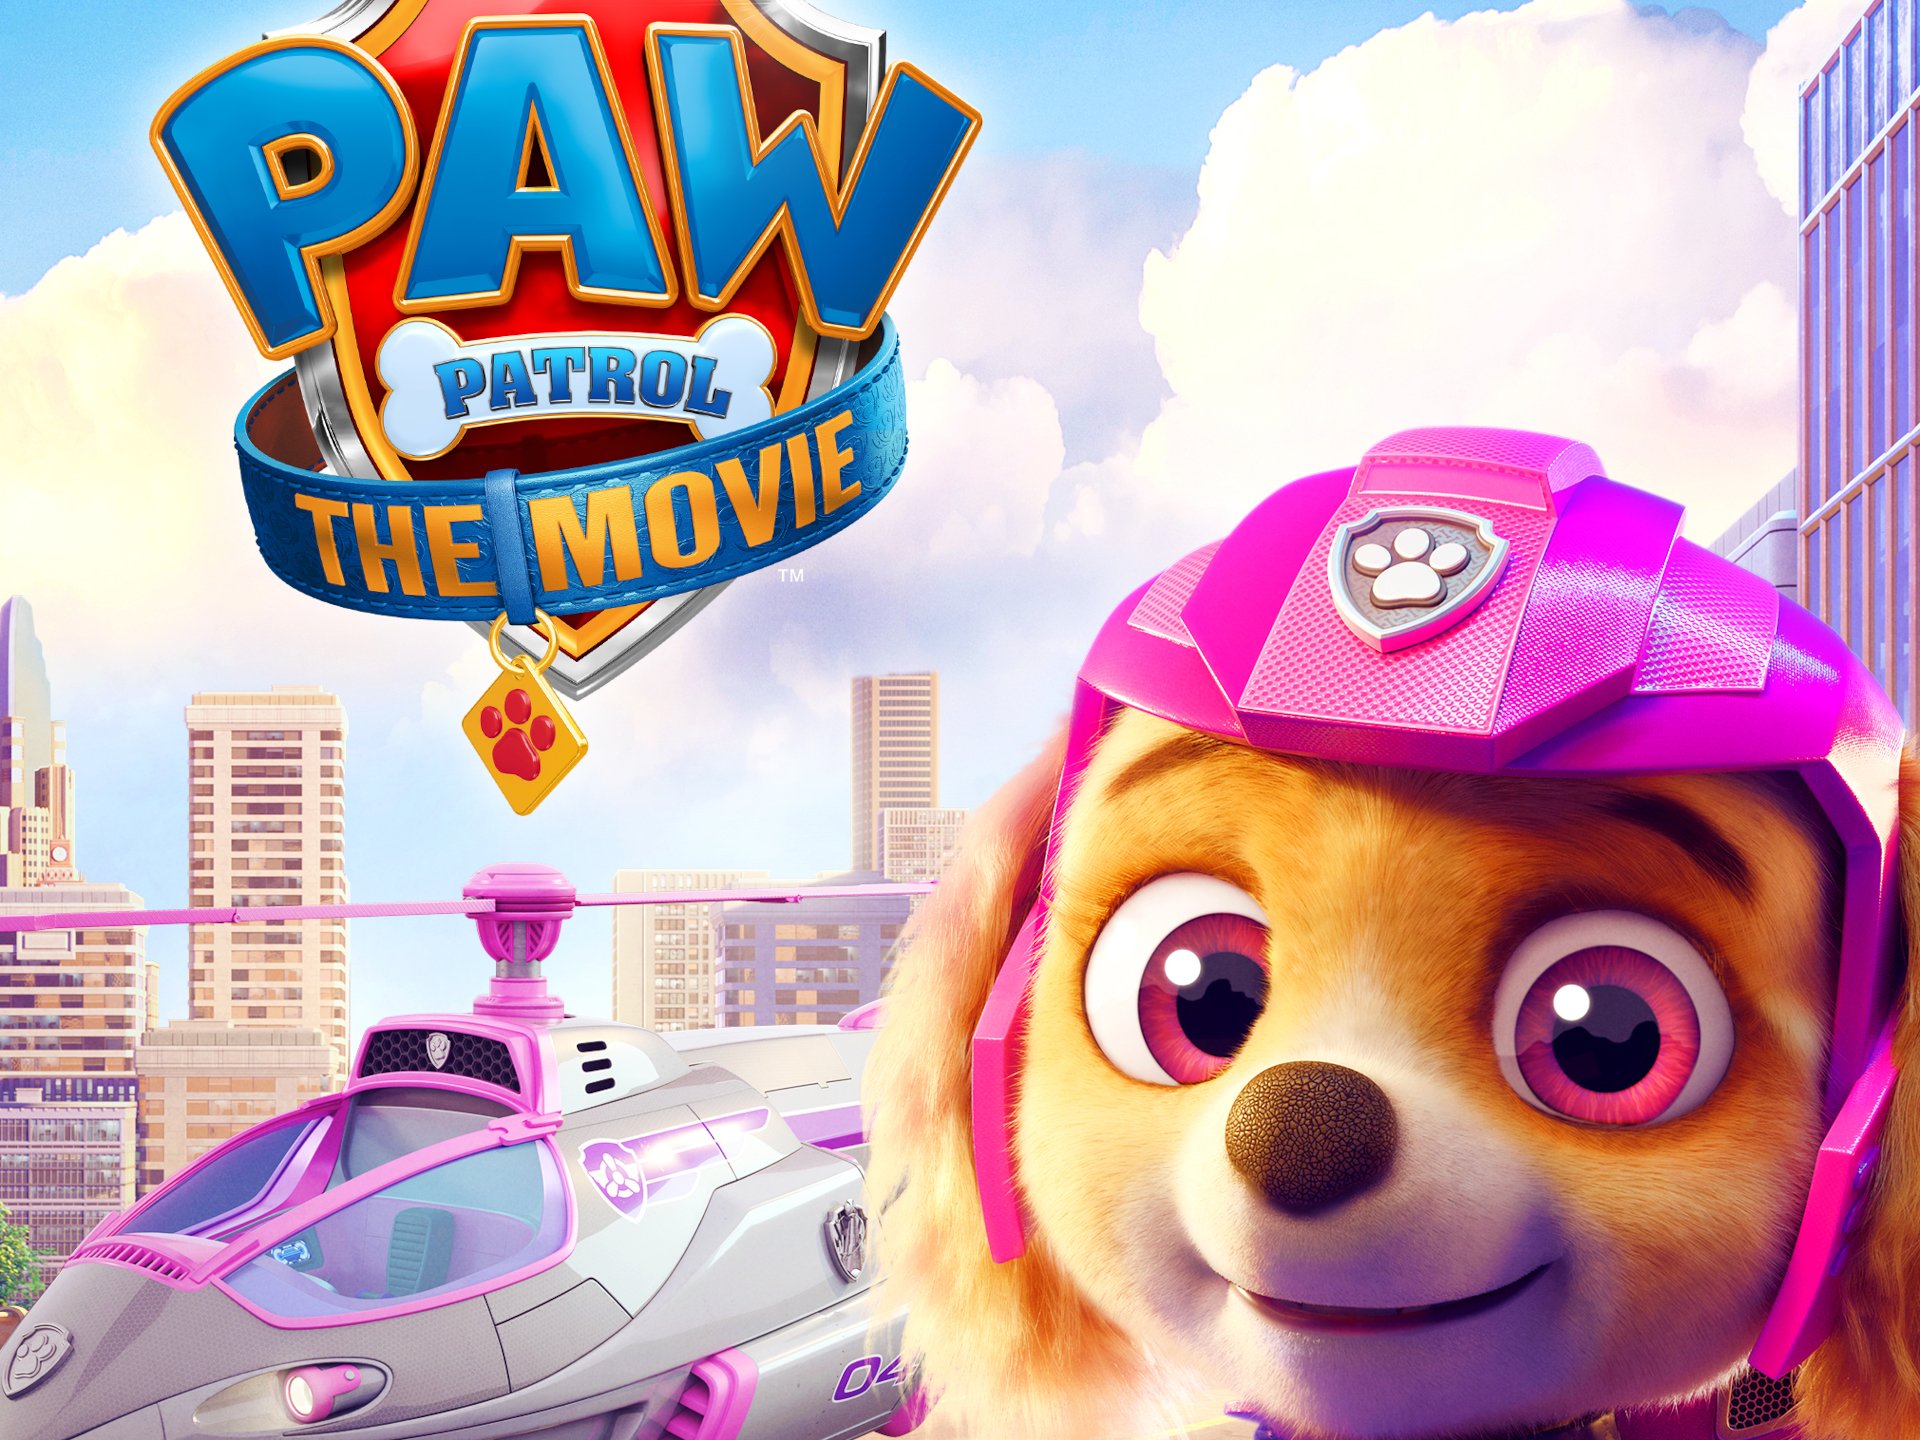 1920x1440 Paw Patrol: The Movie Wallpaper Background Image. 